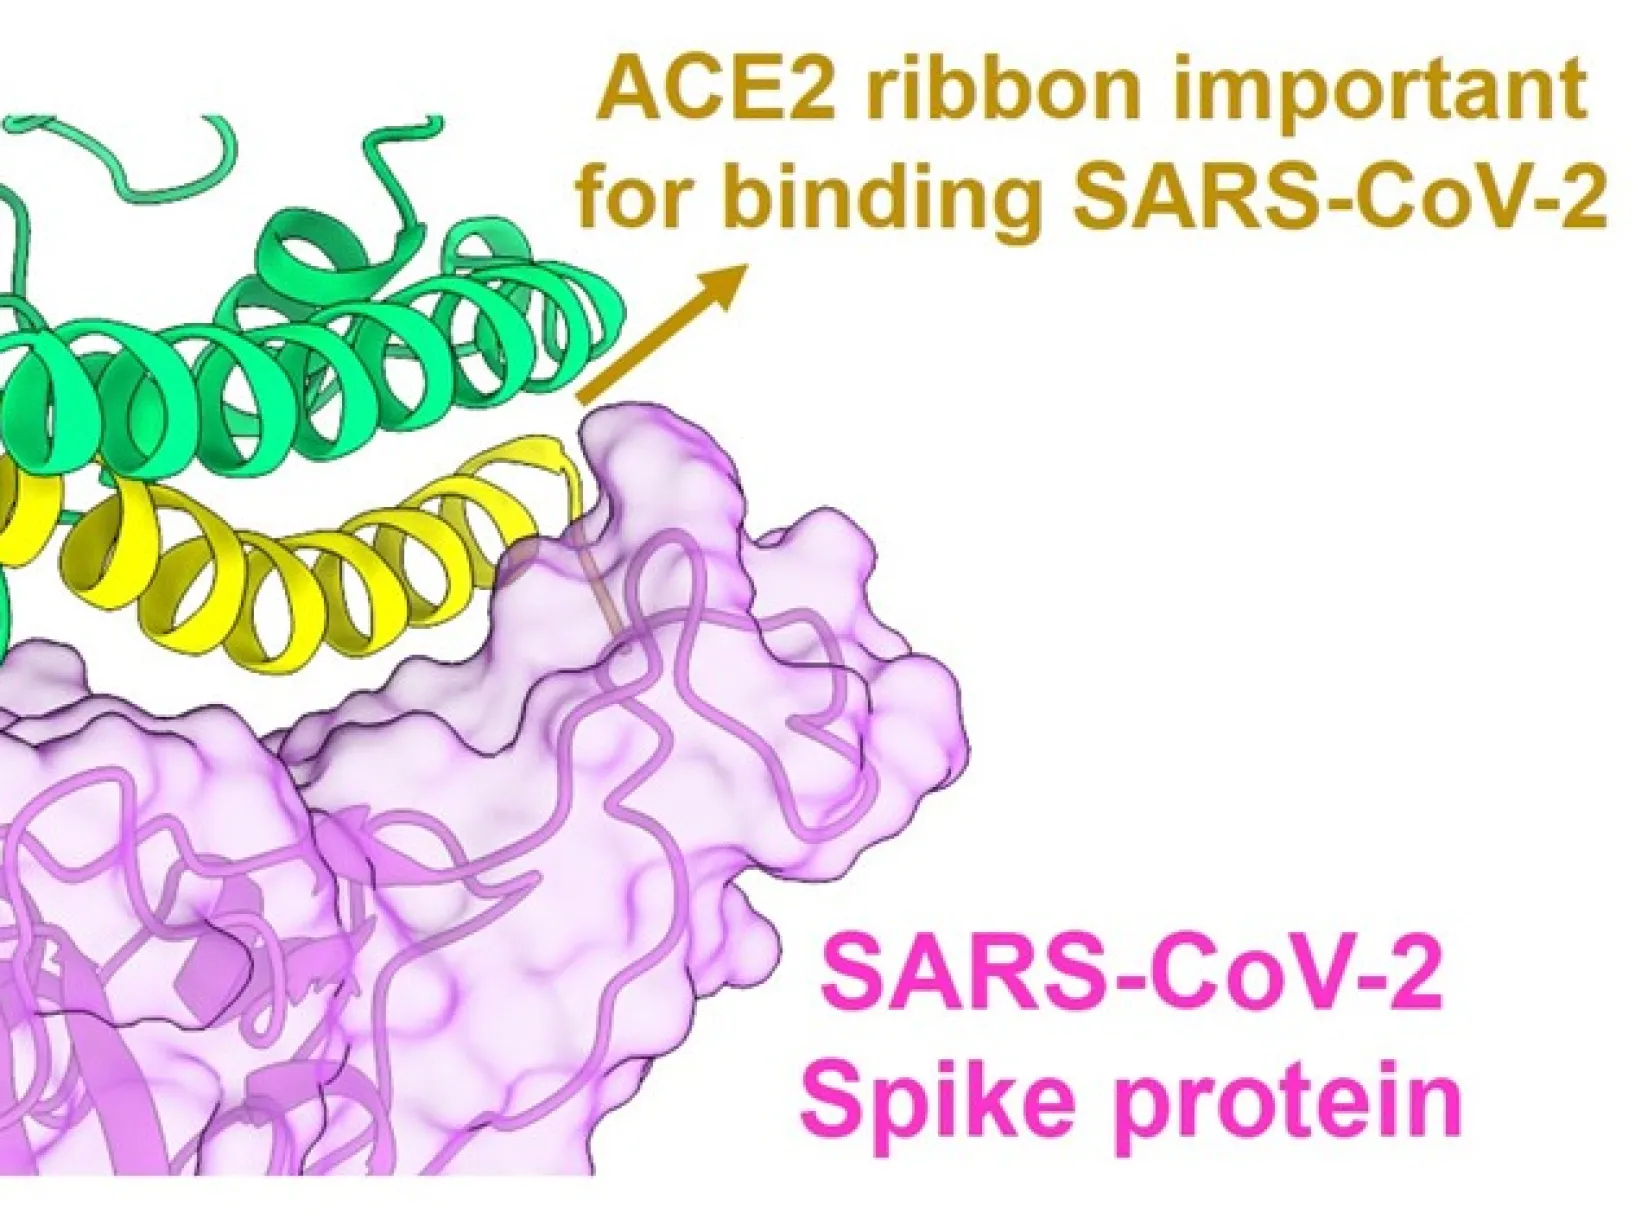 Structural interaction of SARS-CoV-2 Spike protein and ACE2 receptor. Graphic generated using ChimeraX software and published protein structure.